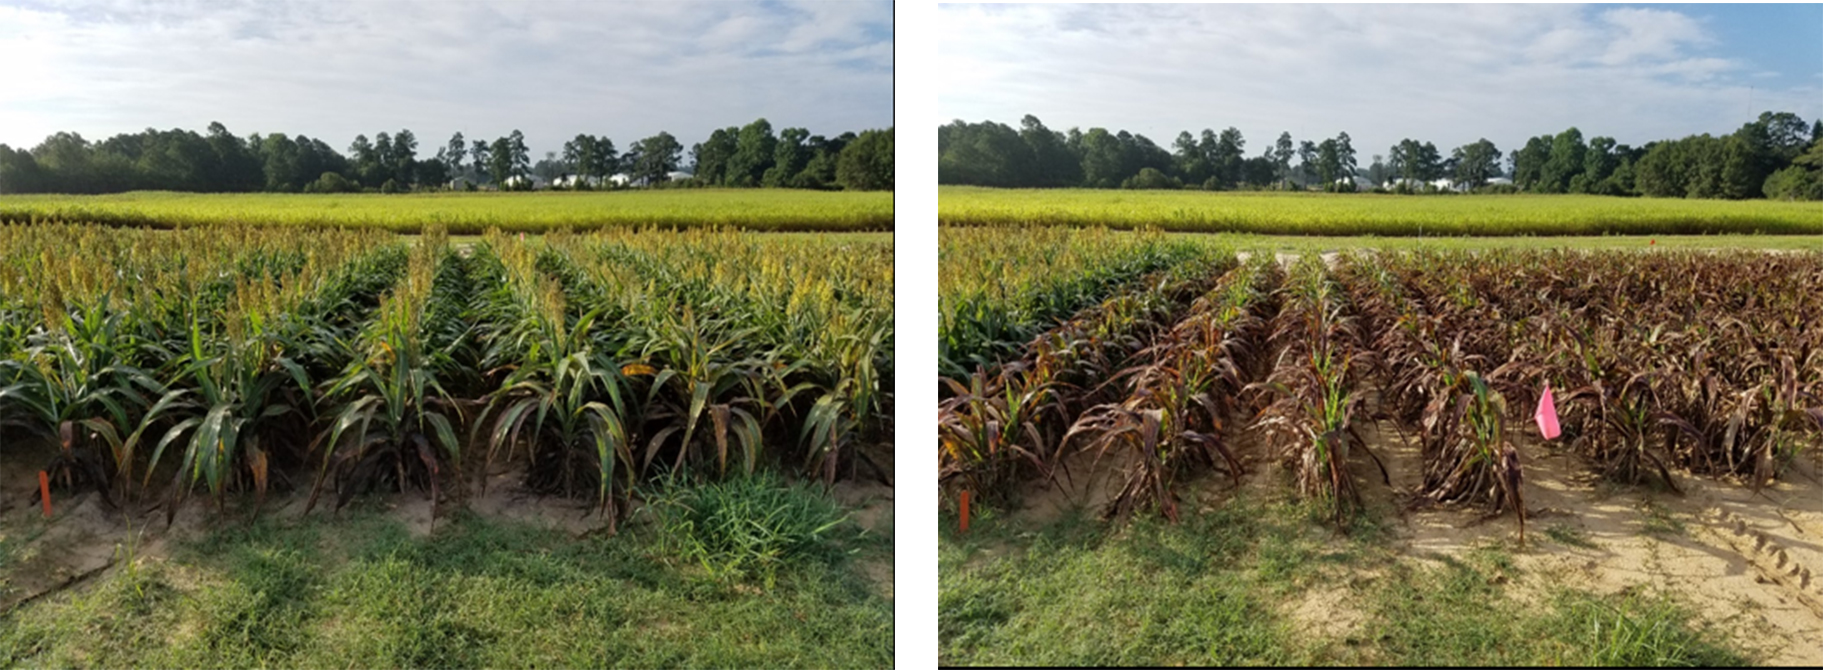 Treated and untreated sorghum